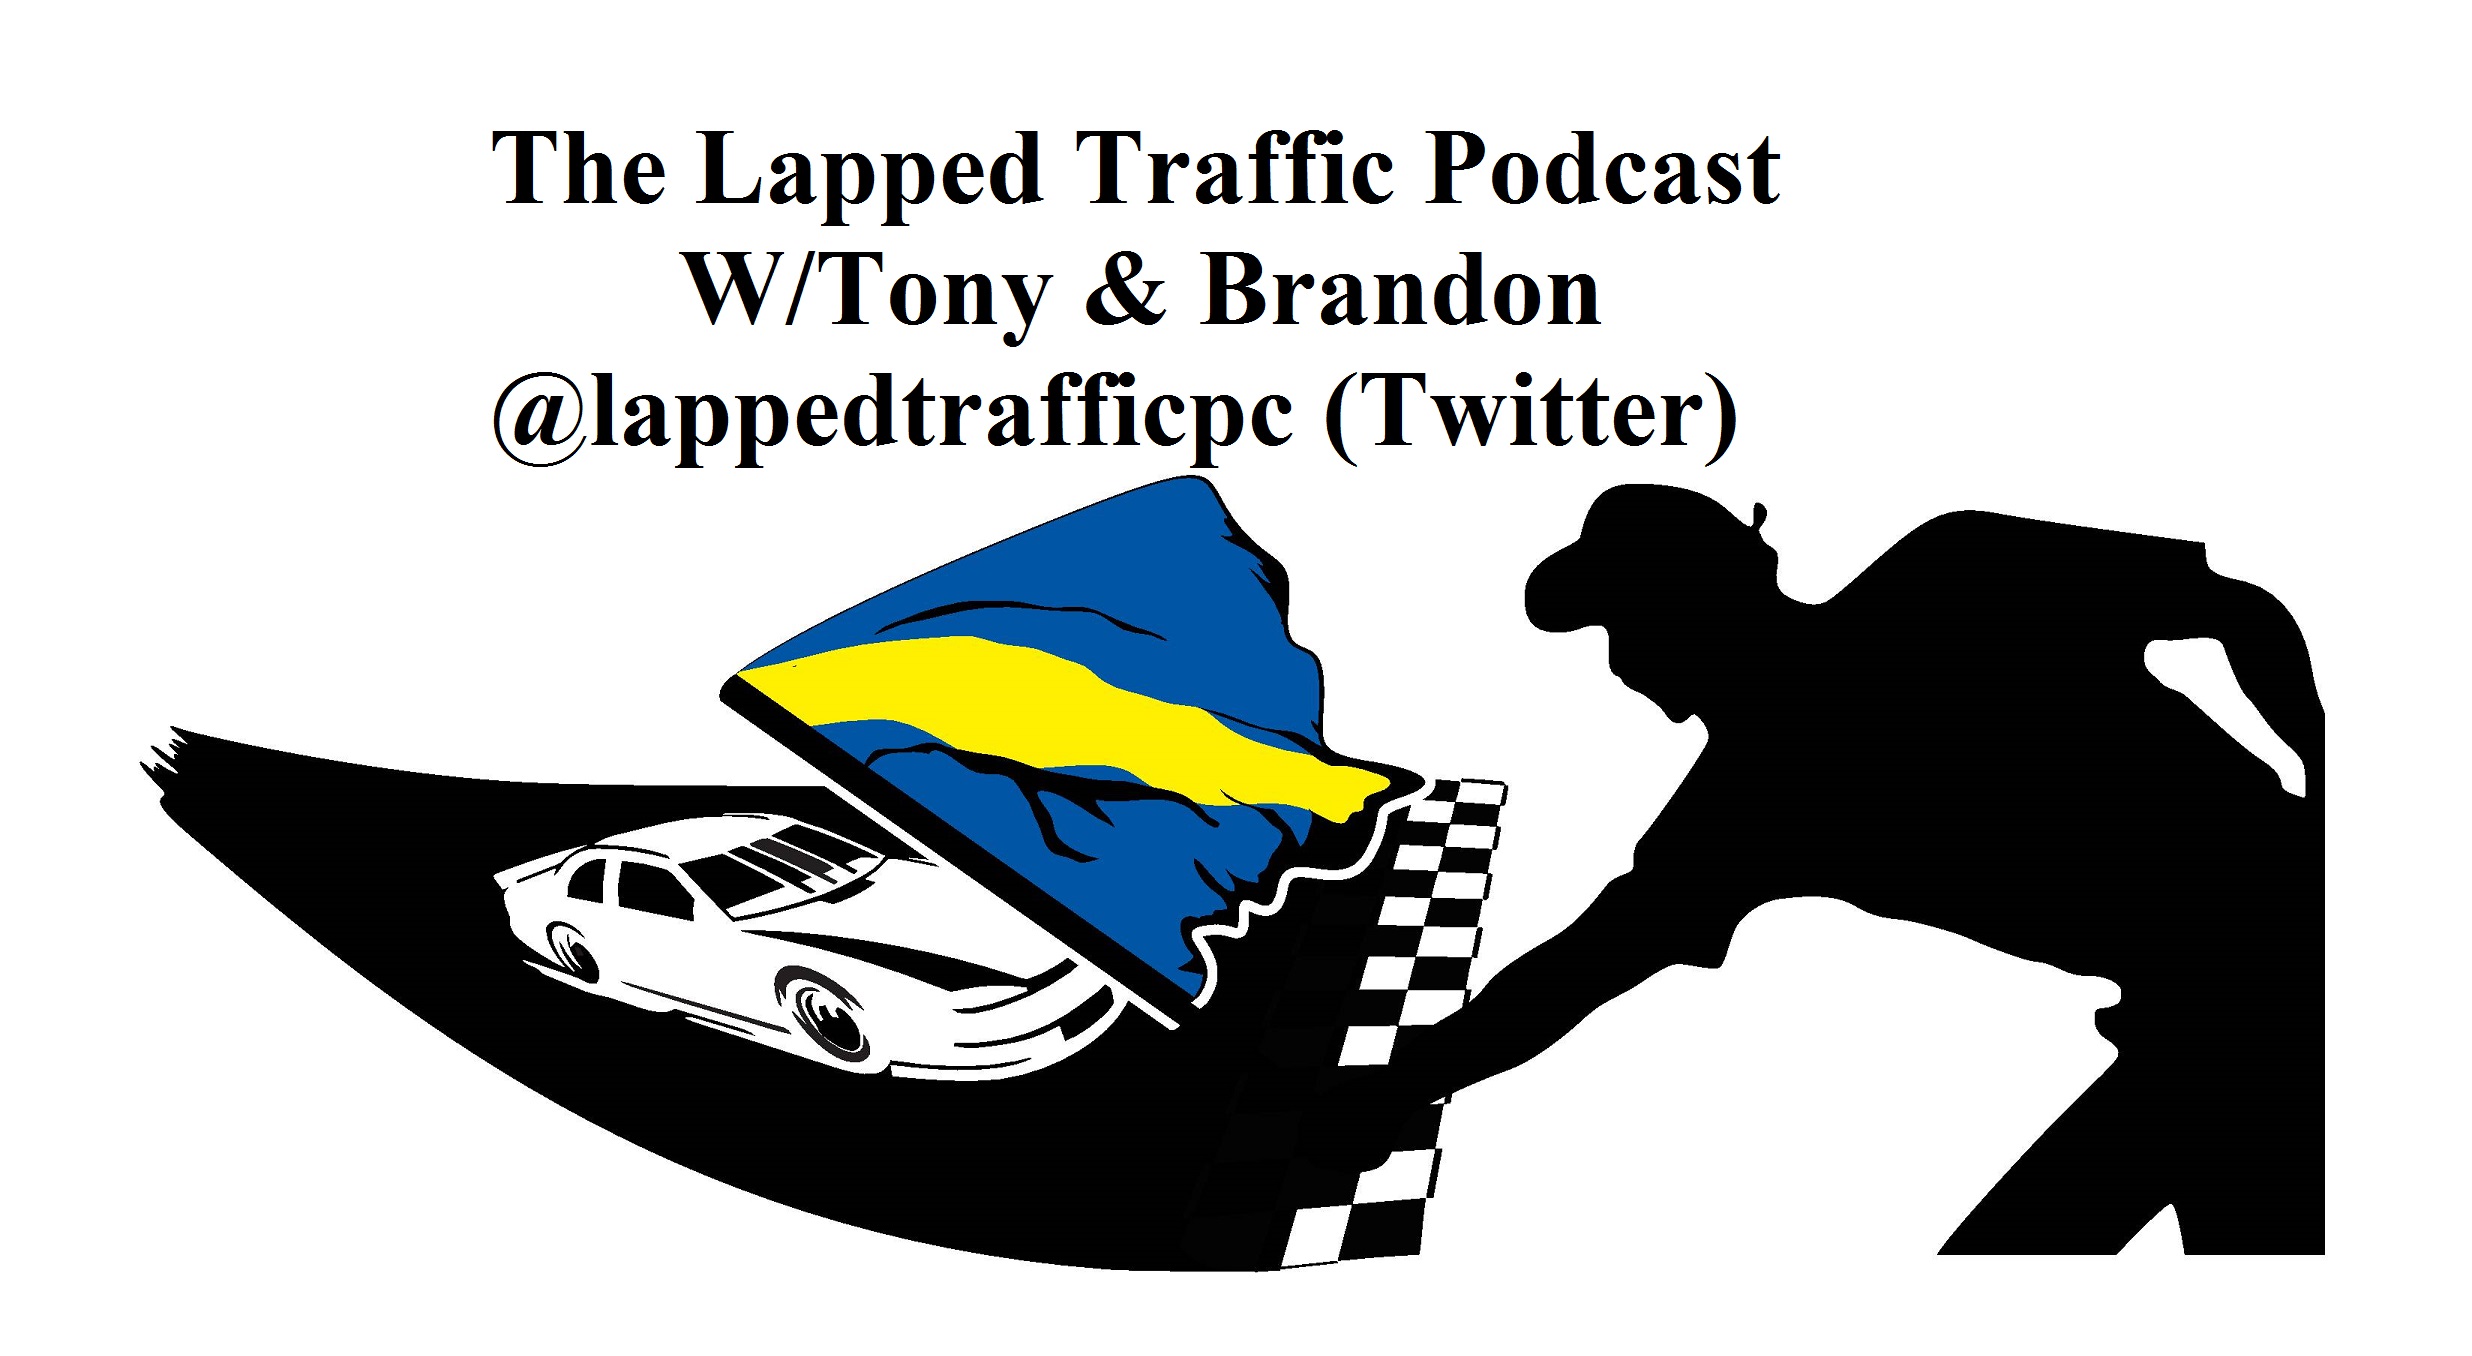 The Lapped Traffic Podcast- Episode 3